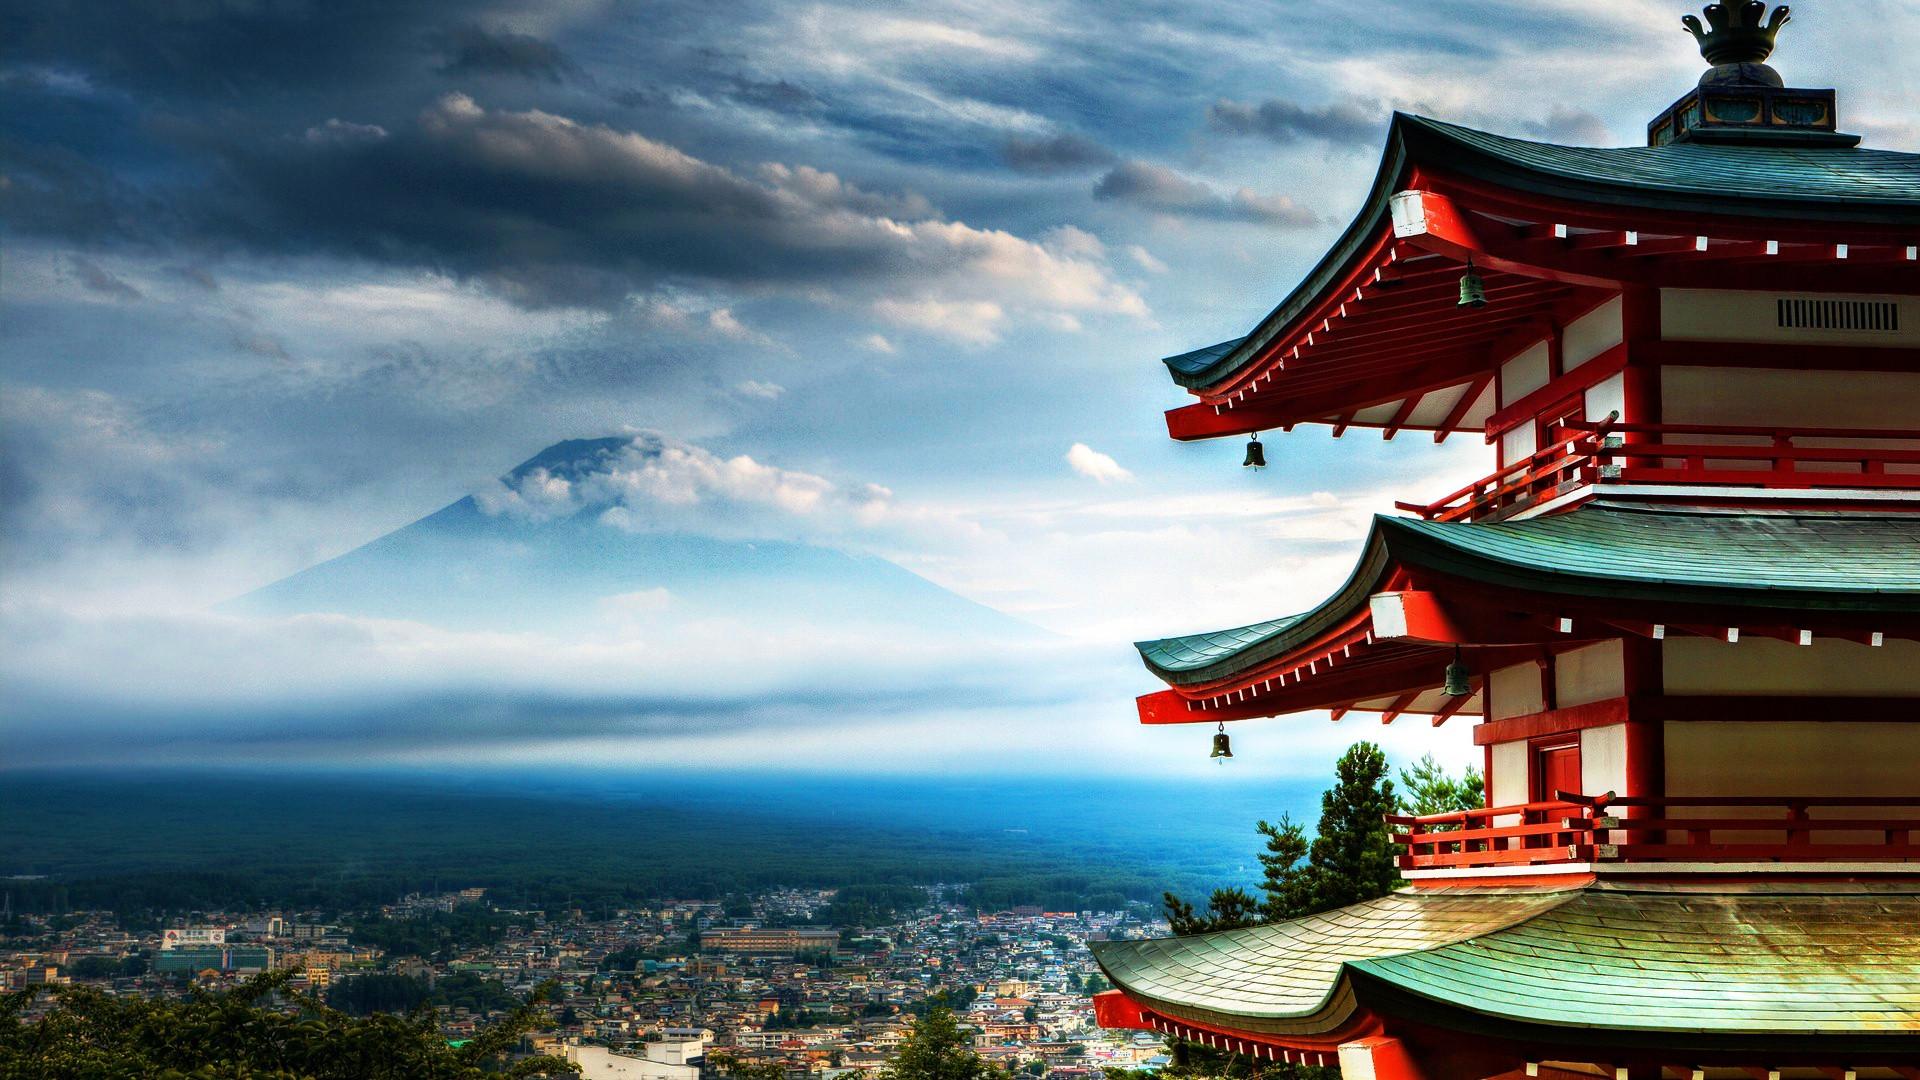 1080p HD Japan Wallpaper For Free Download: The Historical